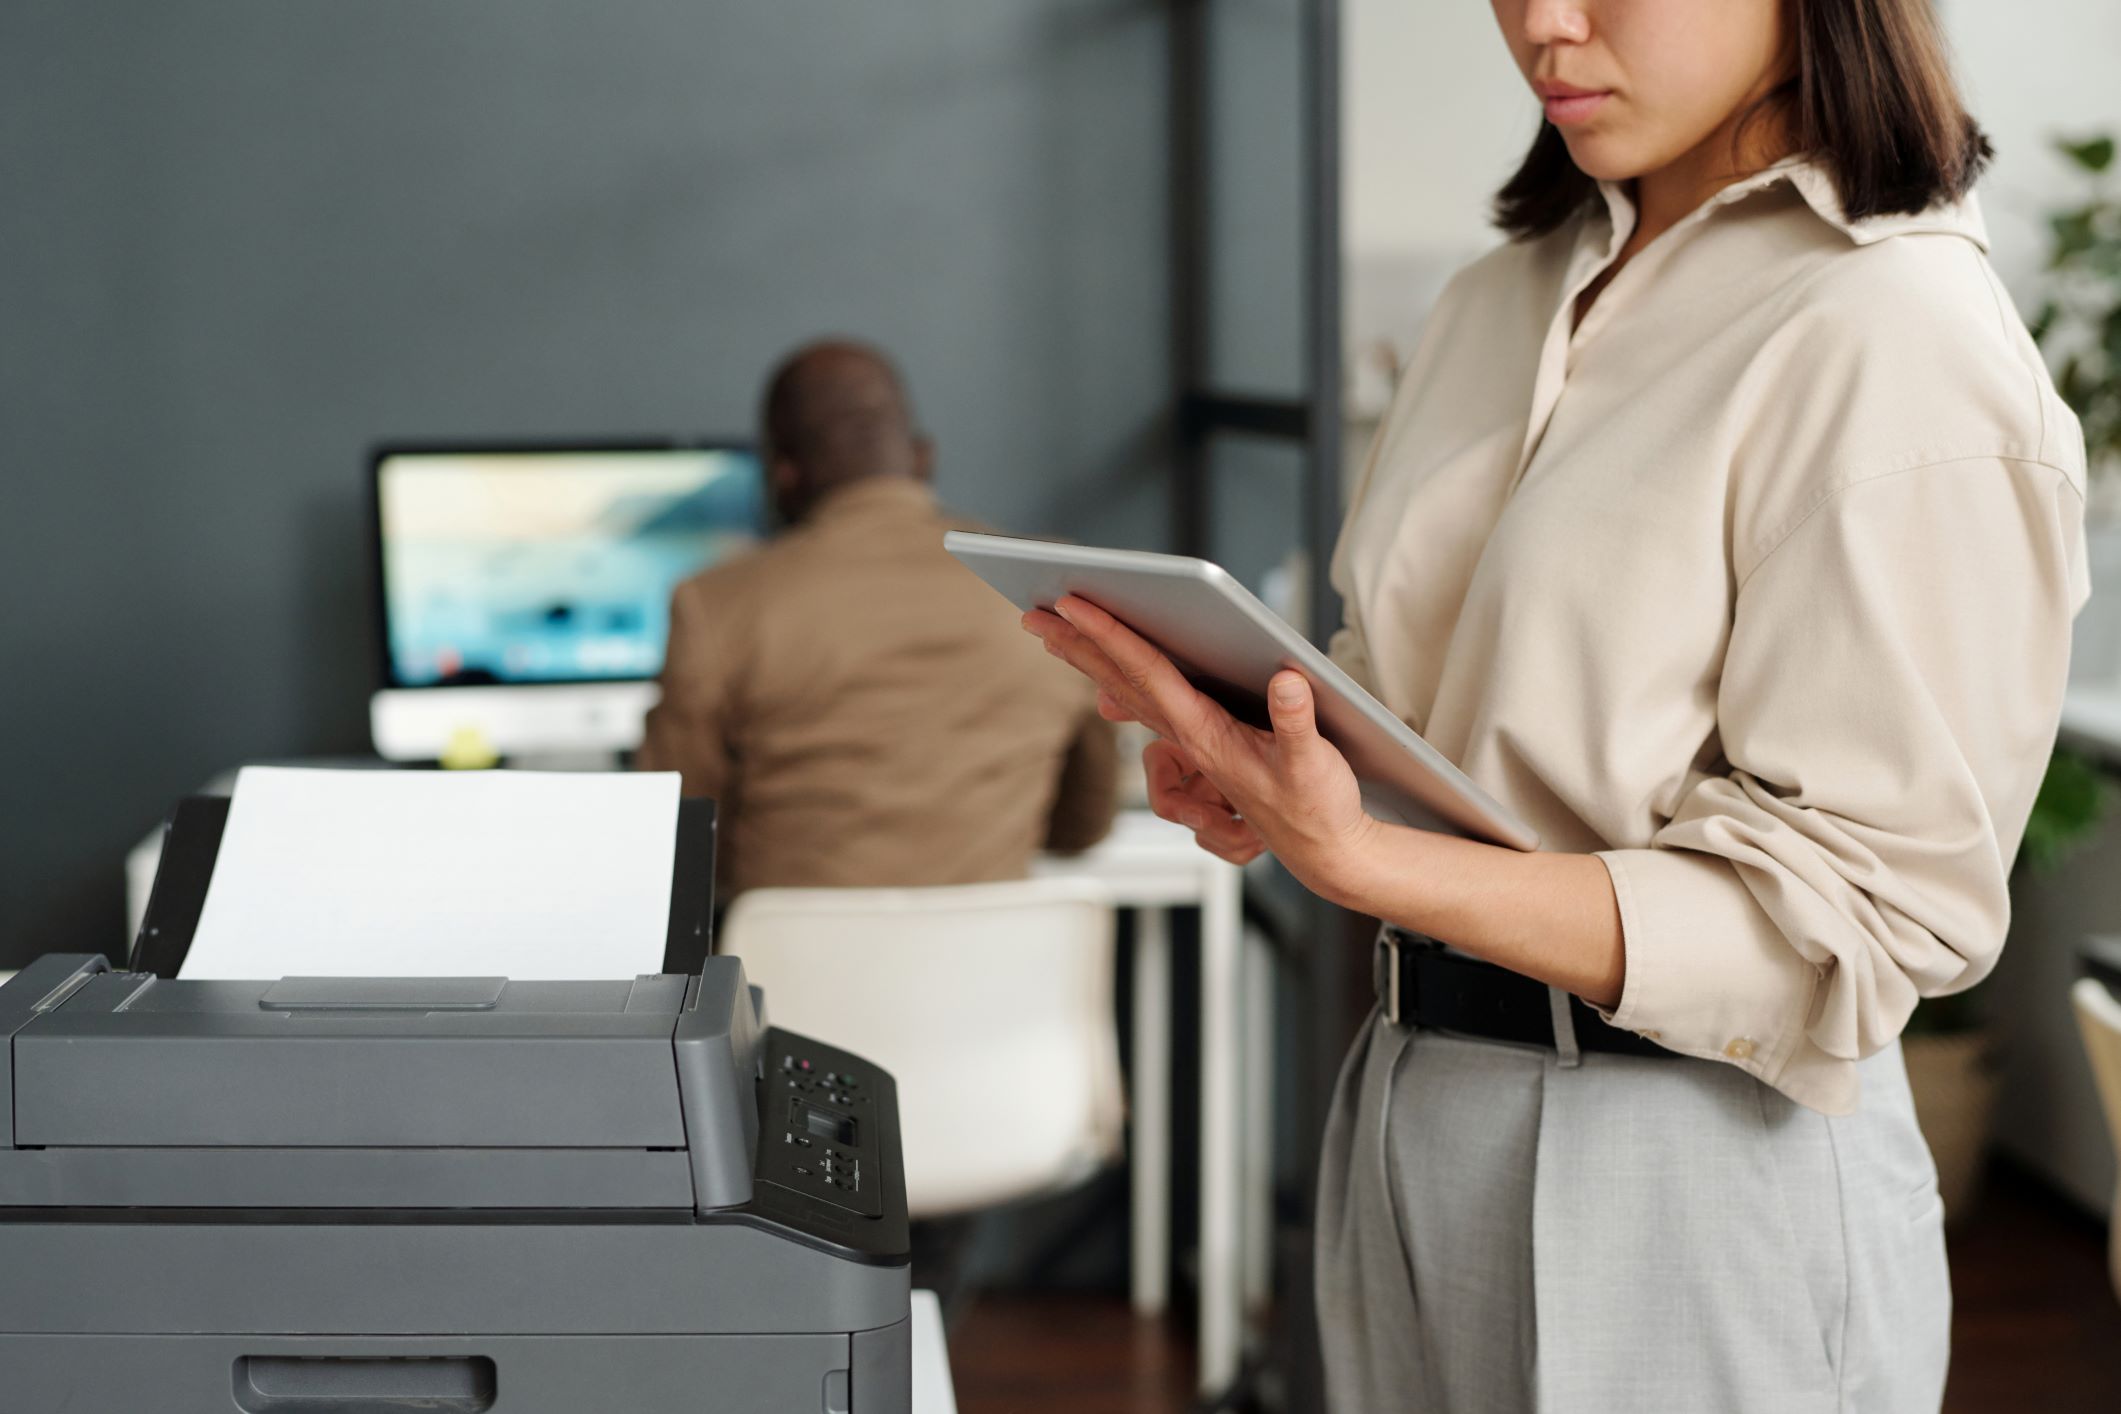 A professional setting where a woman is focused on her tablet next to an all-in-one office printer, with a male colleague working on a computer in the blurred background, highlighting the multifunctionality and workplace integration of such a device.